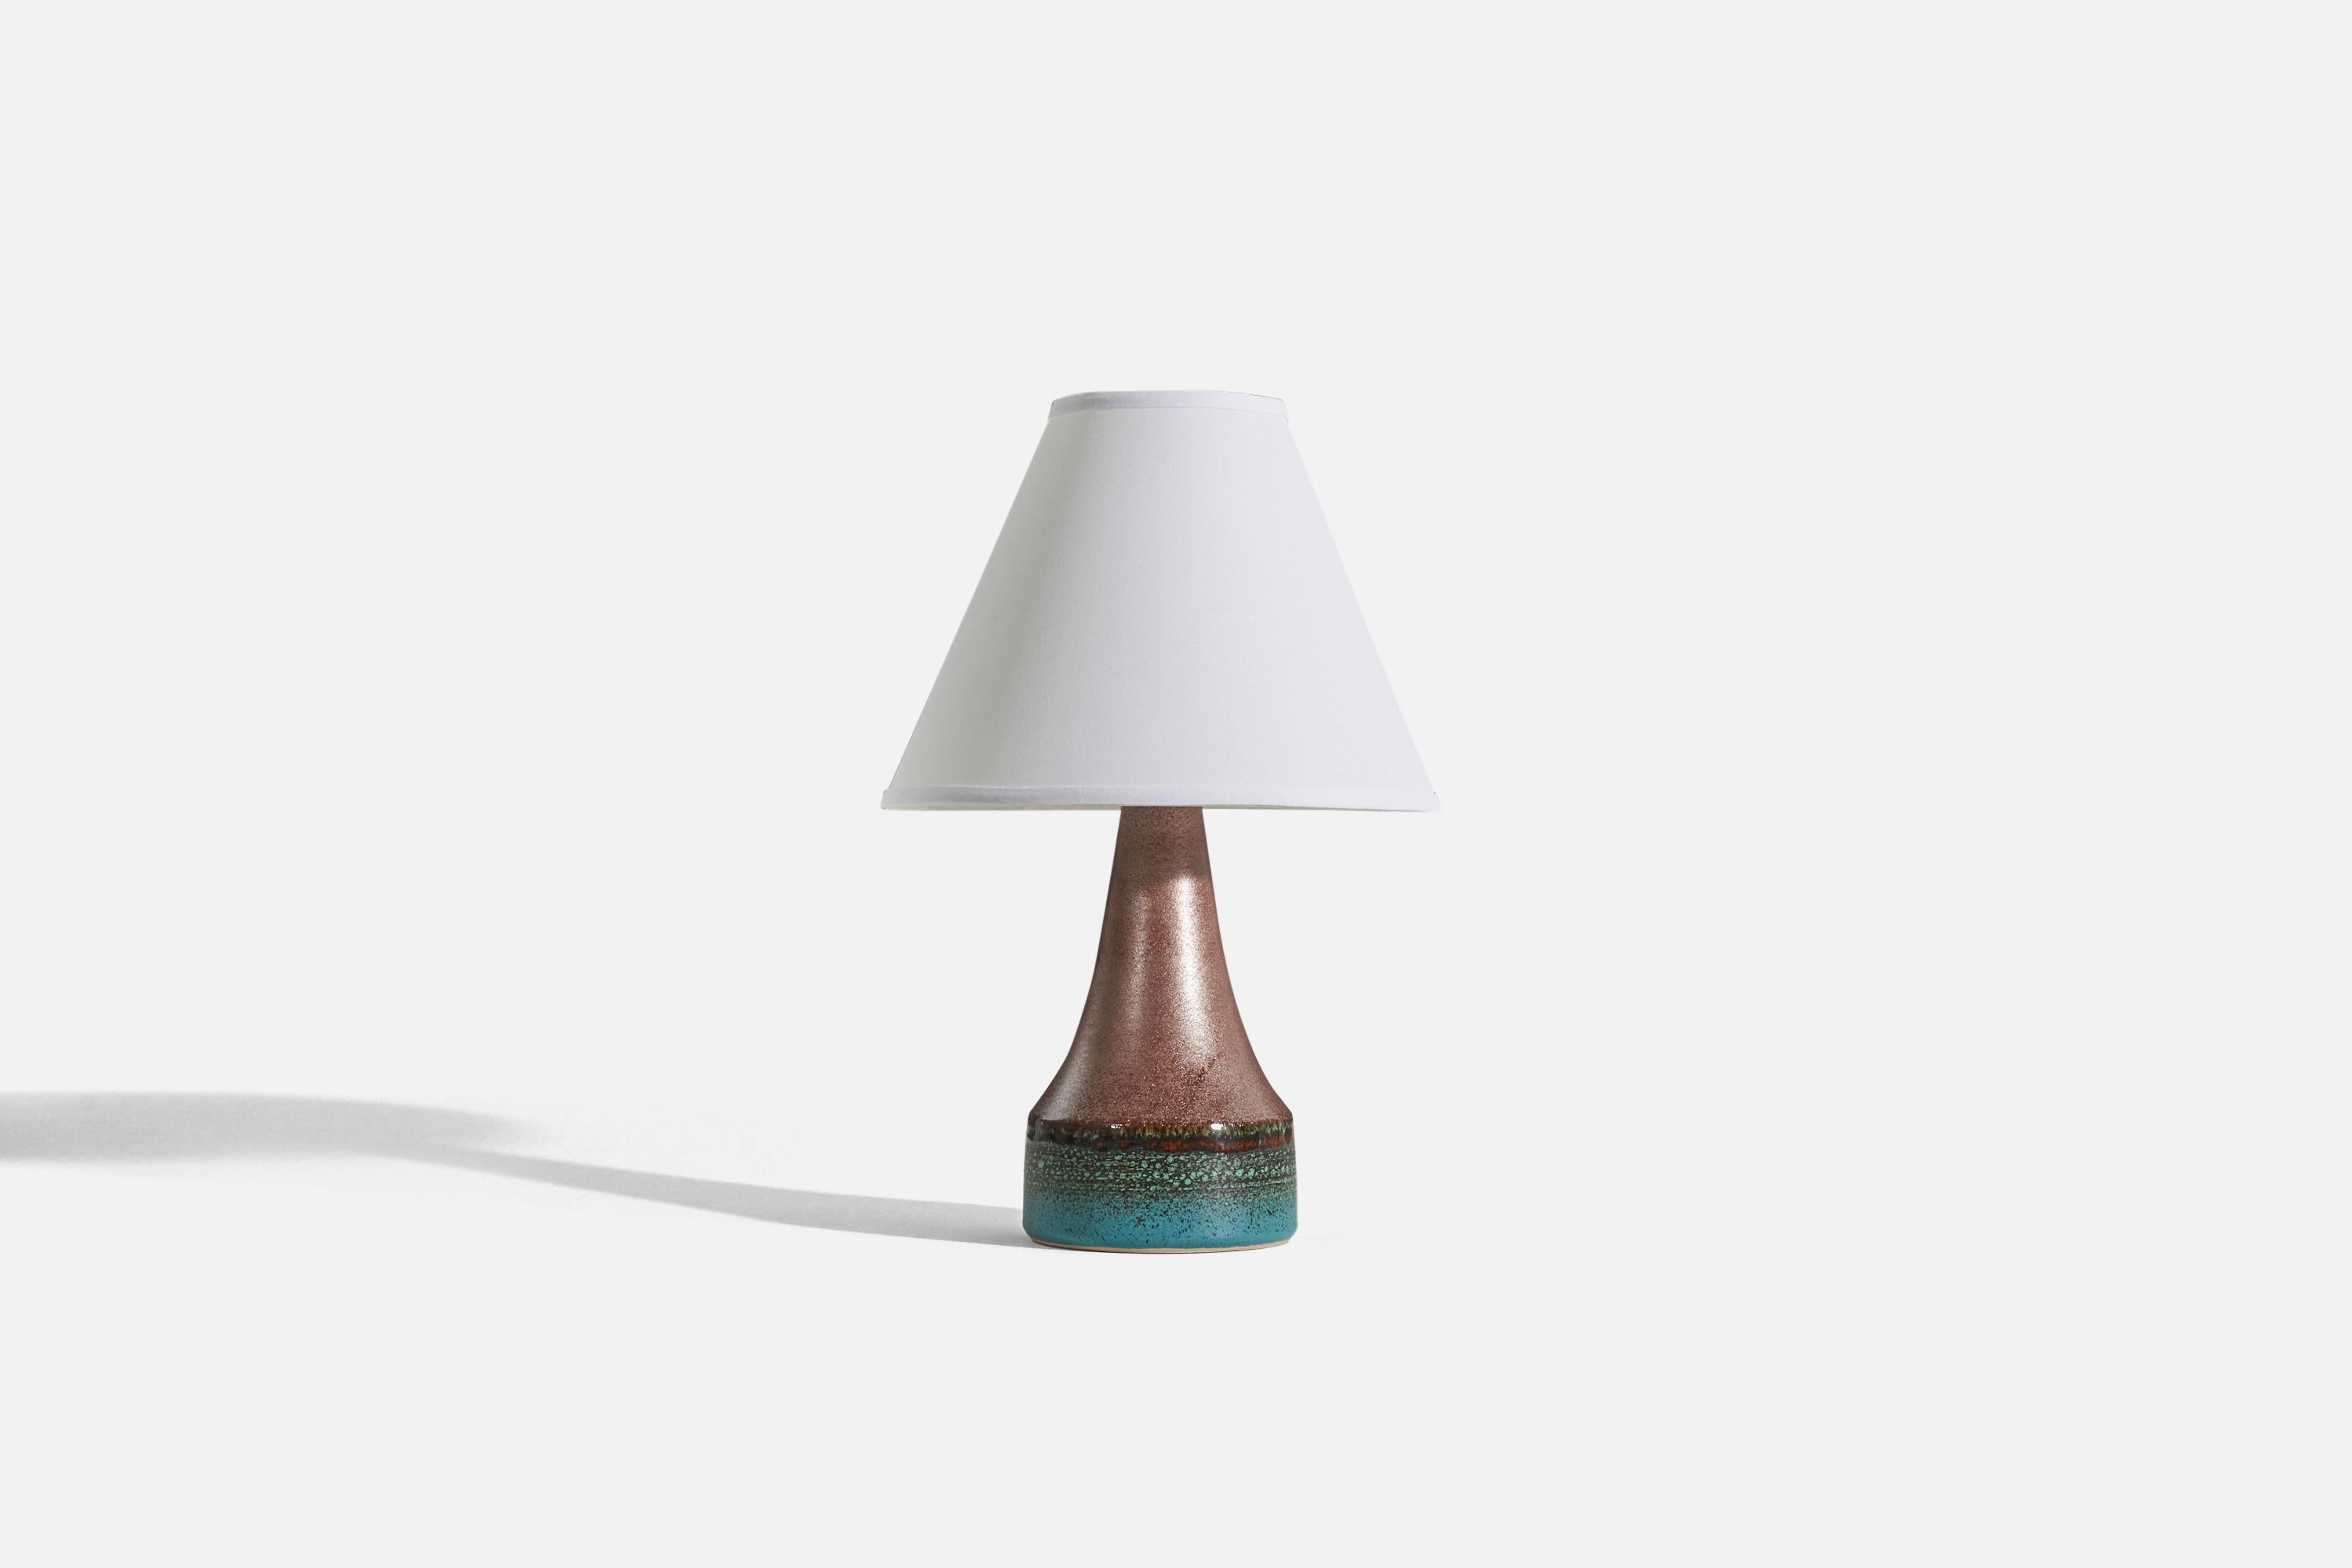 A brown and blue-glazed stoneware table lamp designed and produced by Tilgmans Keramik, Sweden, 1960s. 

Sold without lampshade. 
Dimensions of Lamp (inches) : 10.875 x 5 x 5 (H x W x D)
Dimensions of Shade (inches) : 4 x 10 x 8 (T x B x